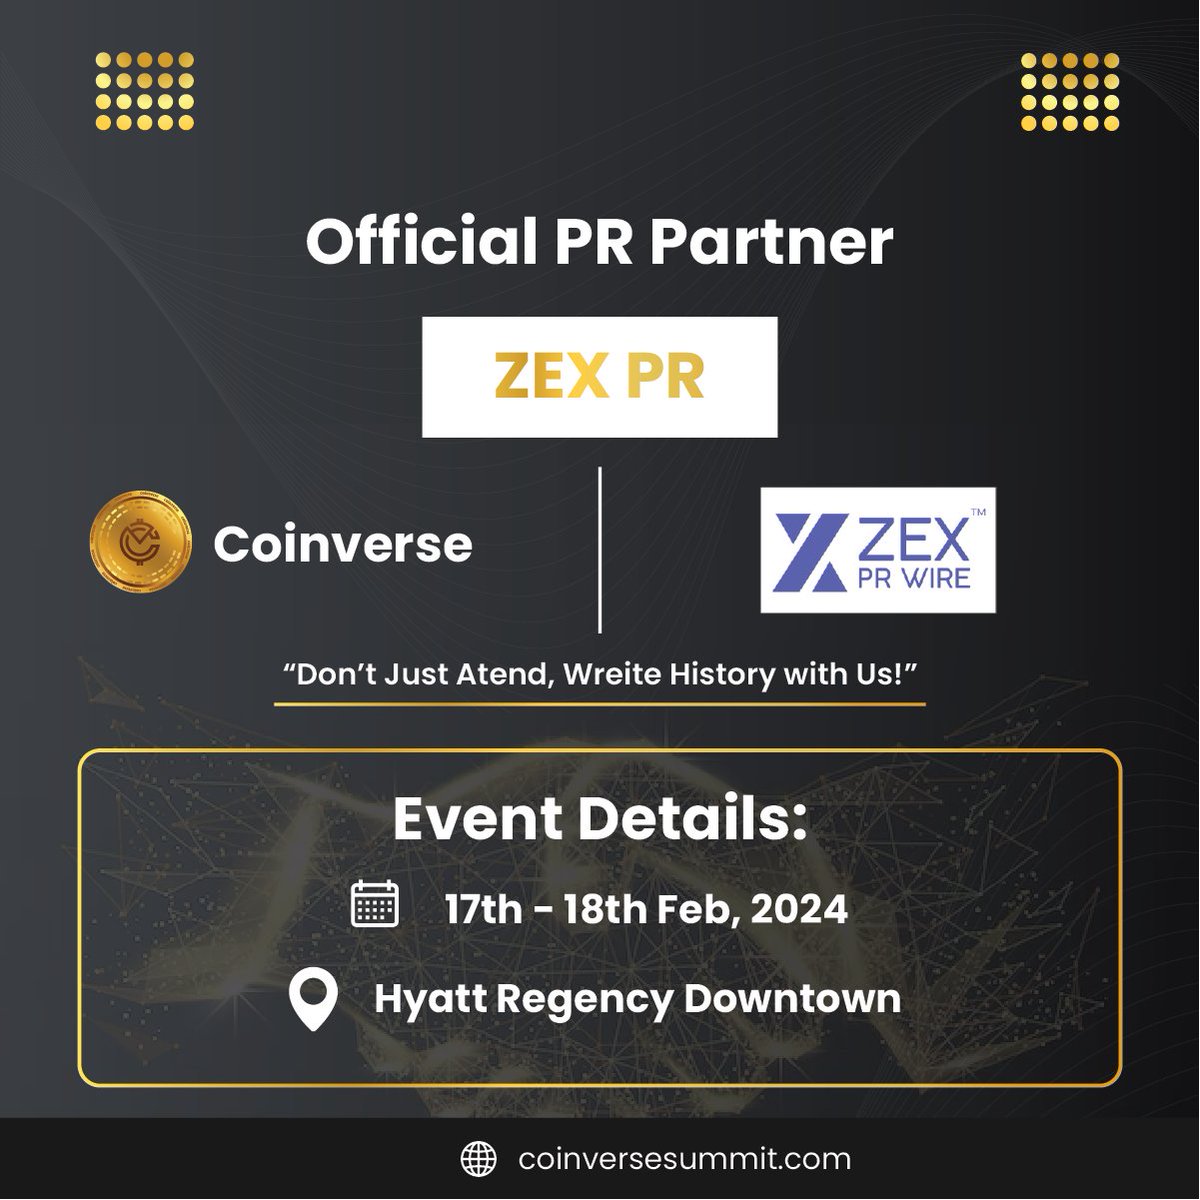 📢 Exciting News! 

🌐 We're thrilled to announce our PR partner for Coinverse Summit 2024 - ZEX PR WIRE™! 🚀 @zexprwire 

Stay tuned for unparalleled media coverage as we elevate Coinverse Summit with ZEX PR WIRE™ on board! 🚀

#Web3 #ToTheMoon #CryptoChristmas